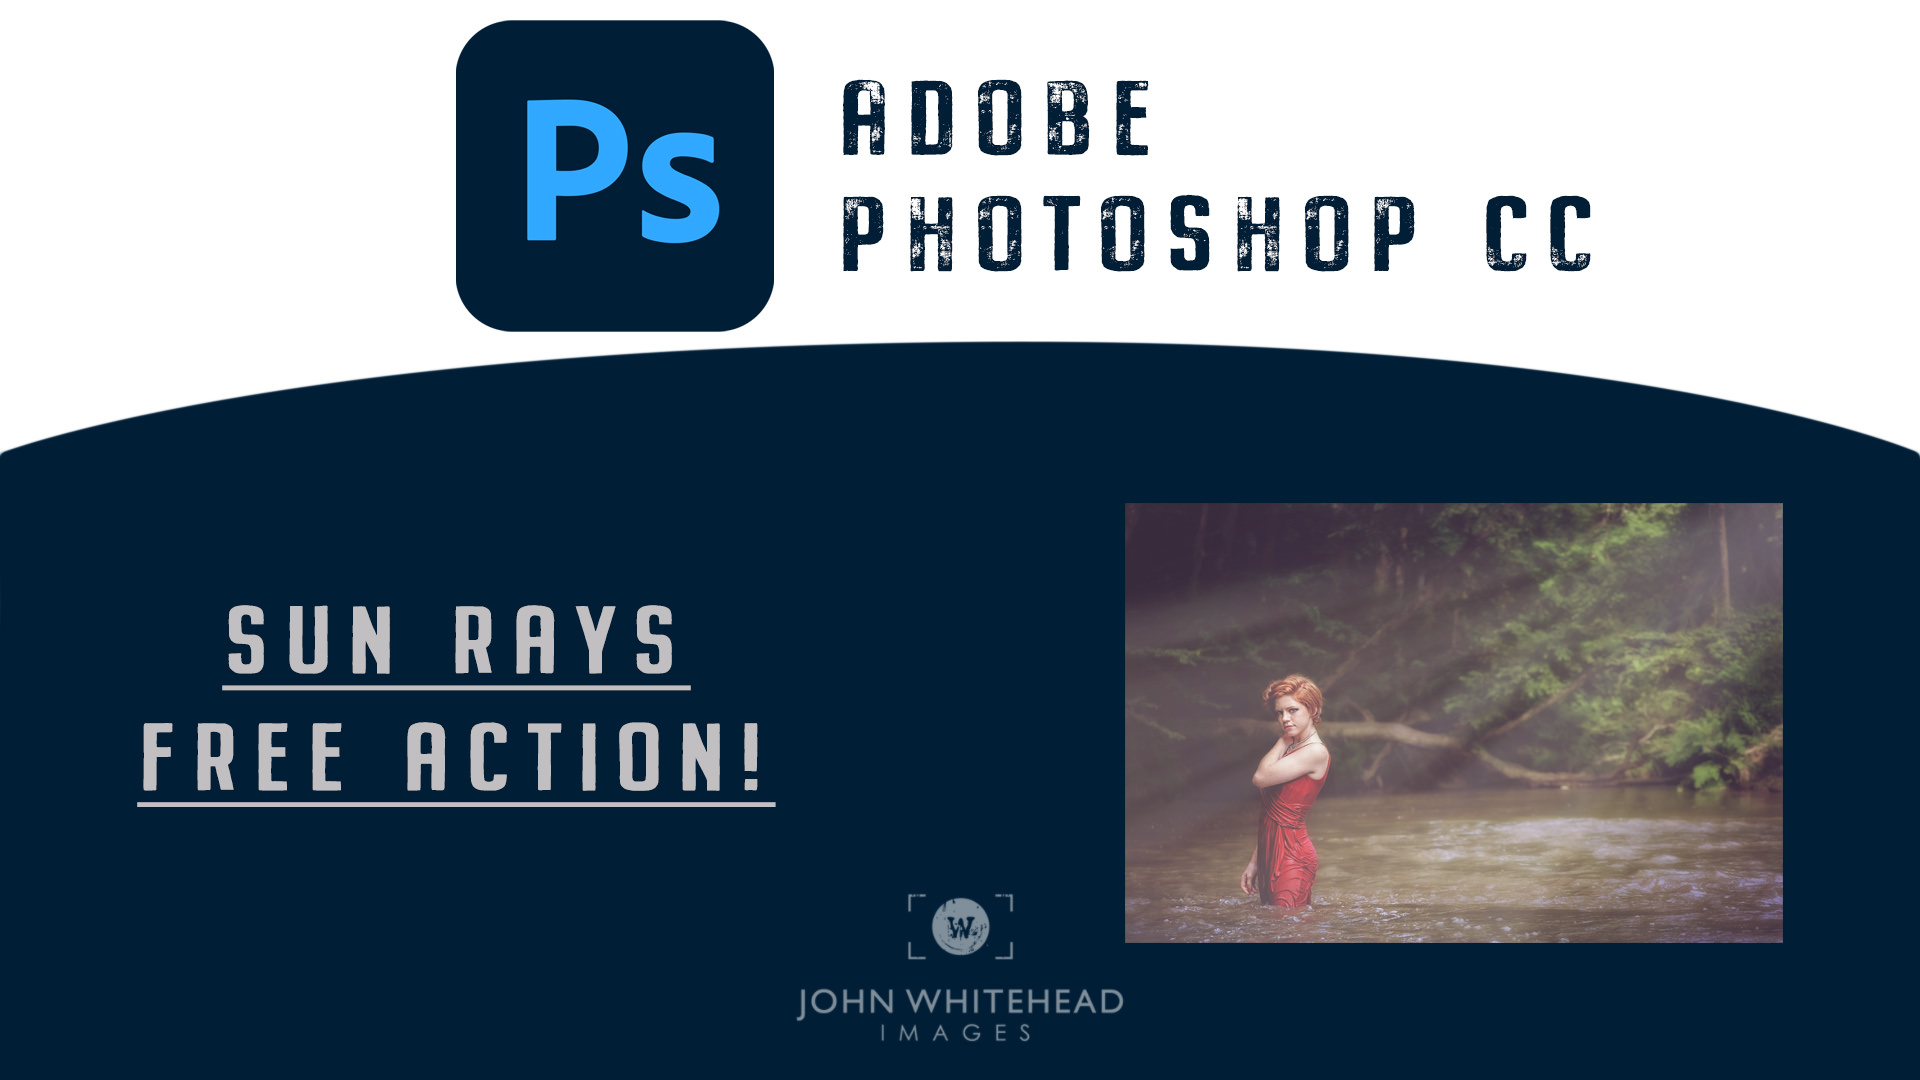 How to Create Stunning Light Rays in Photoshop with 1 Action Click<span class="rmp-archive-results-widget "><i class=" rmp-icon rmp-icon--ratings rmp-icon--star rmp-icon--full-highlight"></i><i class=" rmp-icon rmp-icon--ratings rmp-icon--star rmp-icon--full-highlight"></i><i class=" rmp-icon rmp-icon--ratings rmp-icon--star rmp-icon--full-highlight"></i><i class=" rmp-icon rmp-icon--ratings rmp-icon--star rmp-icon--full-highlight"></i><i class=" rmp-icon rmp-icon--ratings rmp-icon--star rmp-icon--full-highlight"></i> <span>5 (1)</span></span>